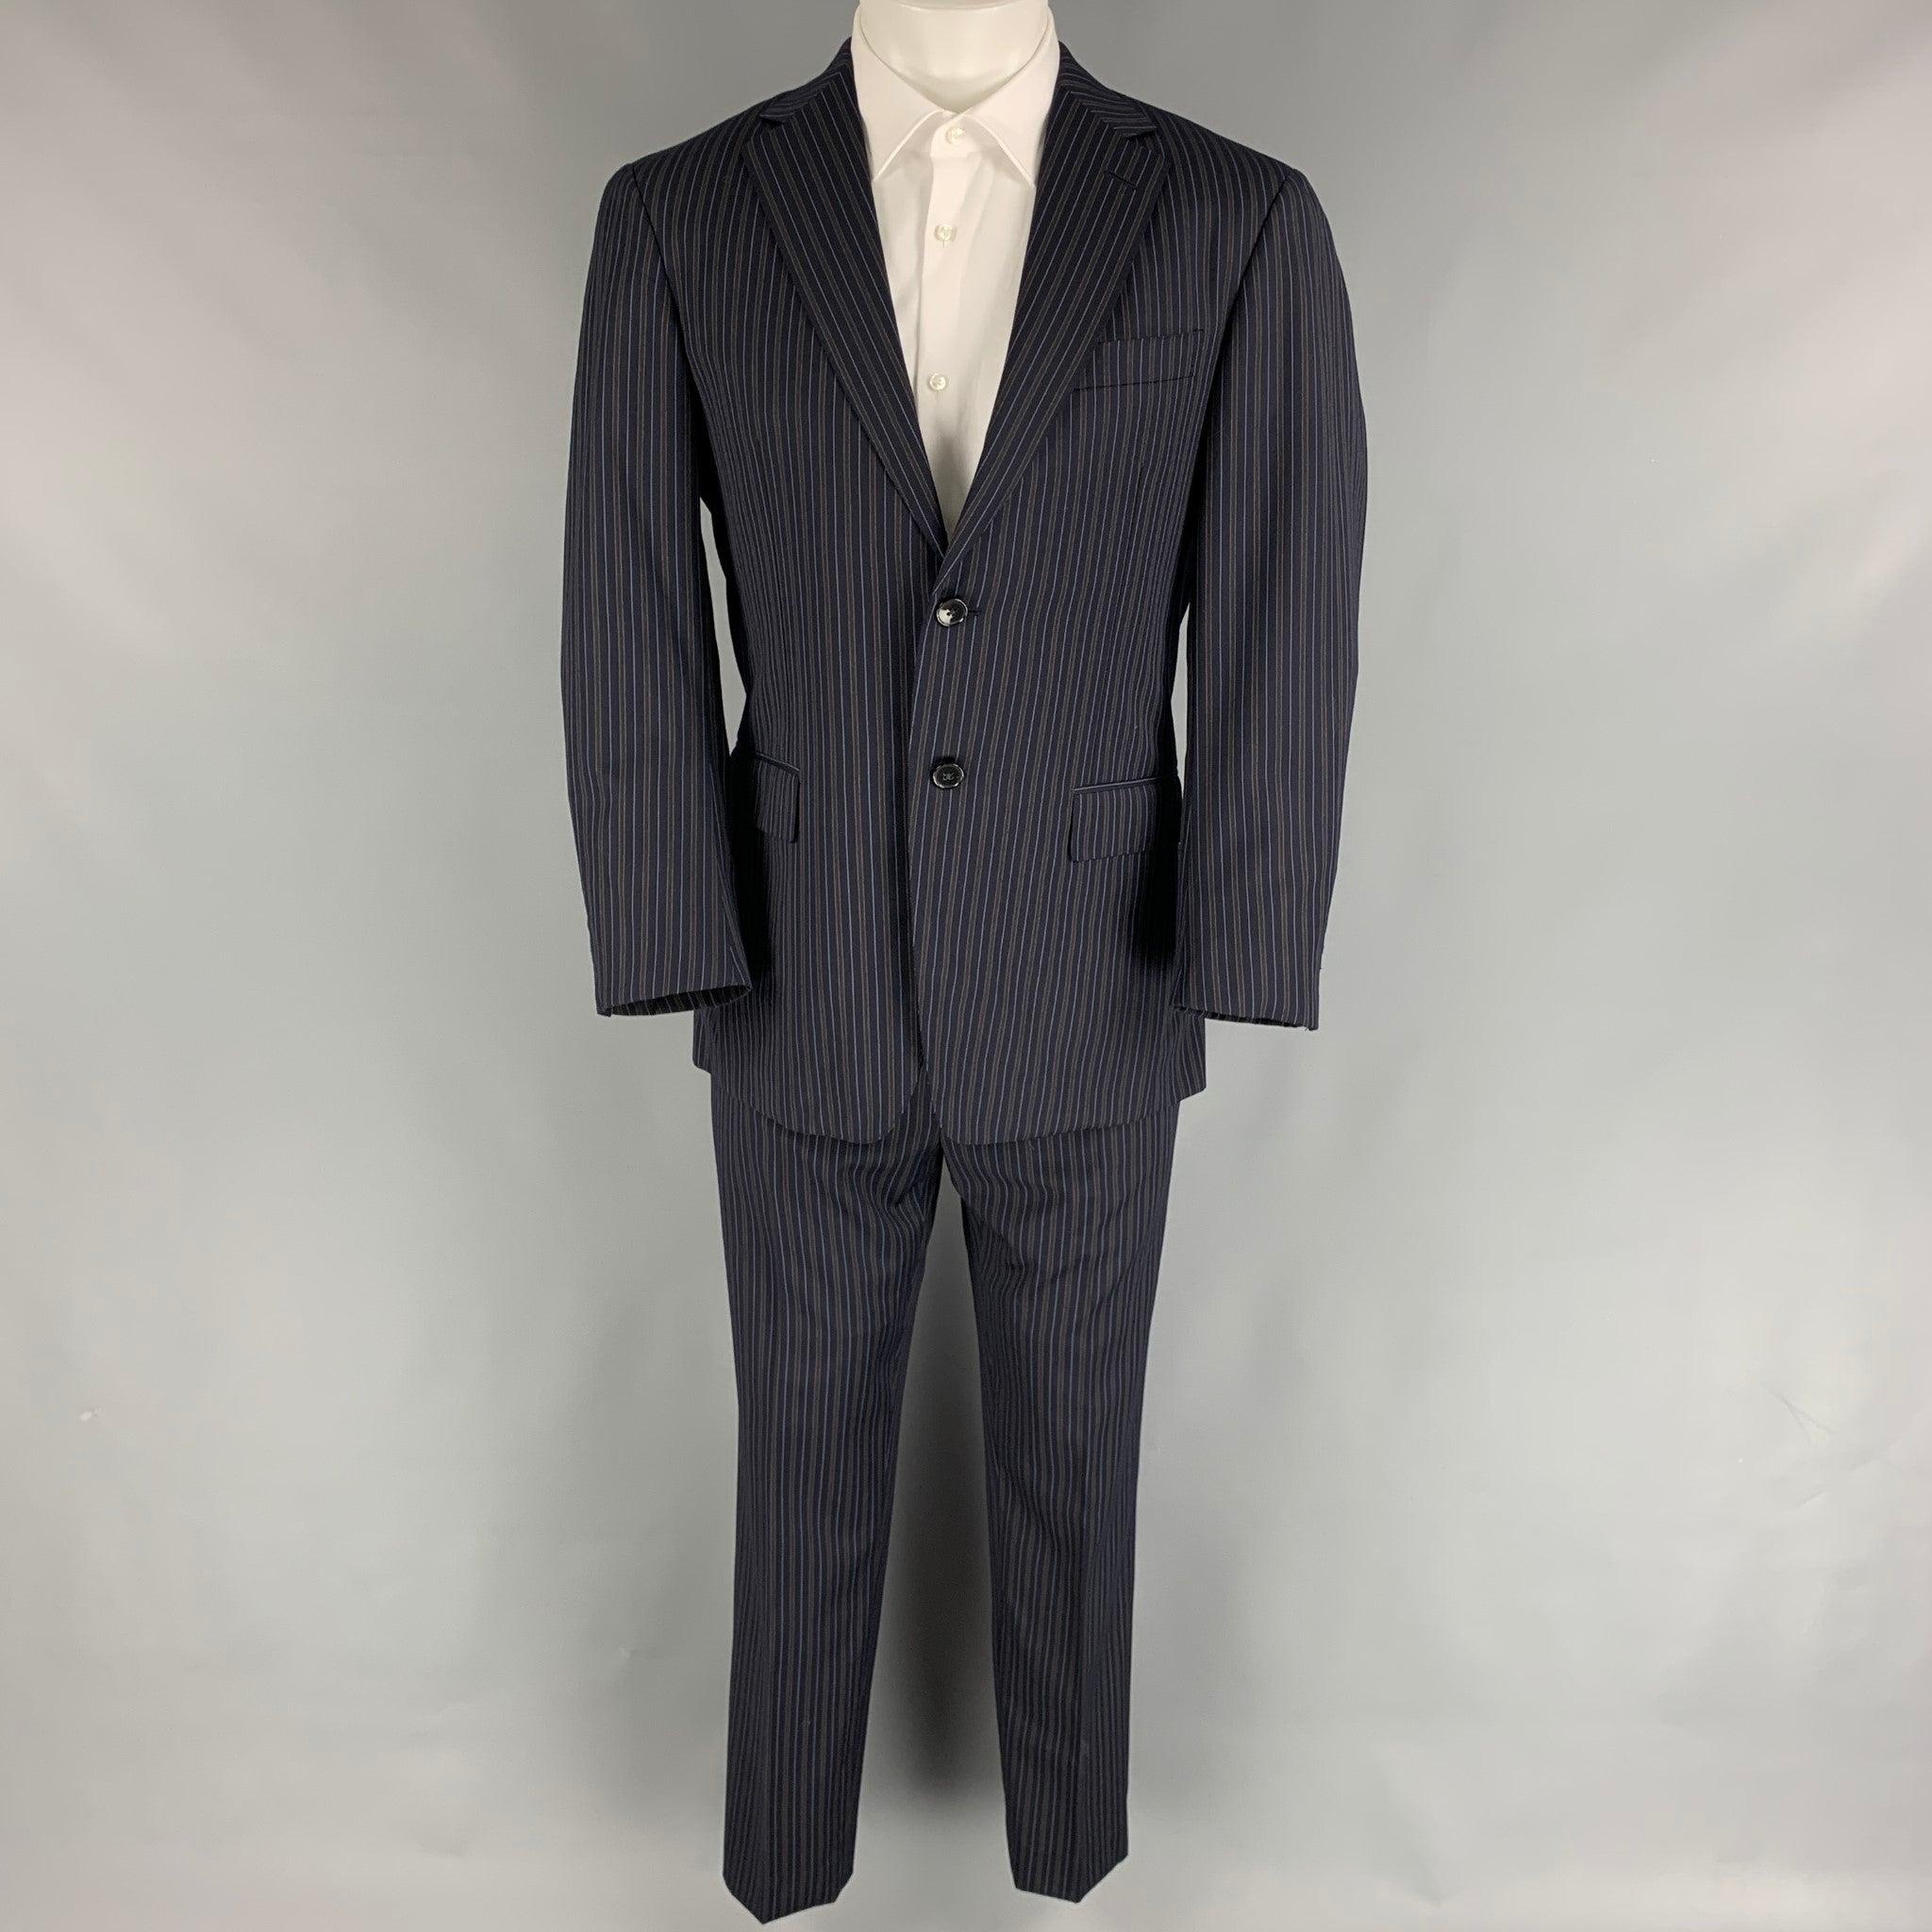 ERMENEGILDO ZEGNA
suit comes in a navy & brown stripe wool with a full liner and includes a single breasted,
 double button sport coat with a notch lapel and matching flat front trousers. Very Good Pre-Owned Condition. 

Marked:   48 

Measurements: